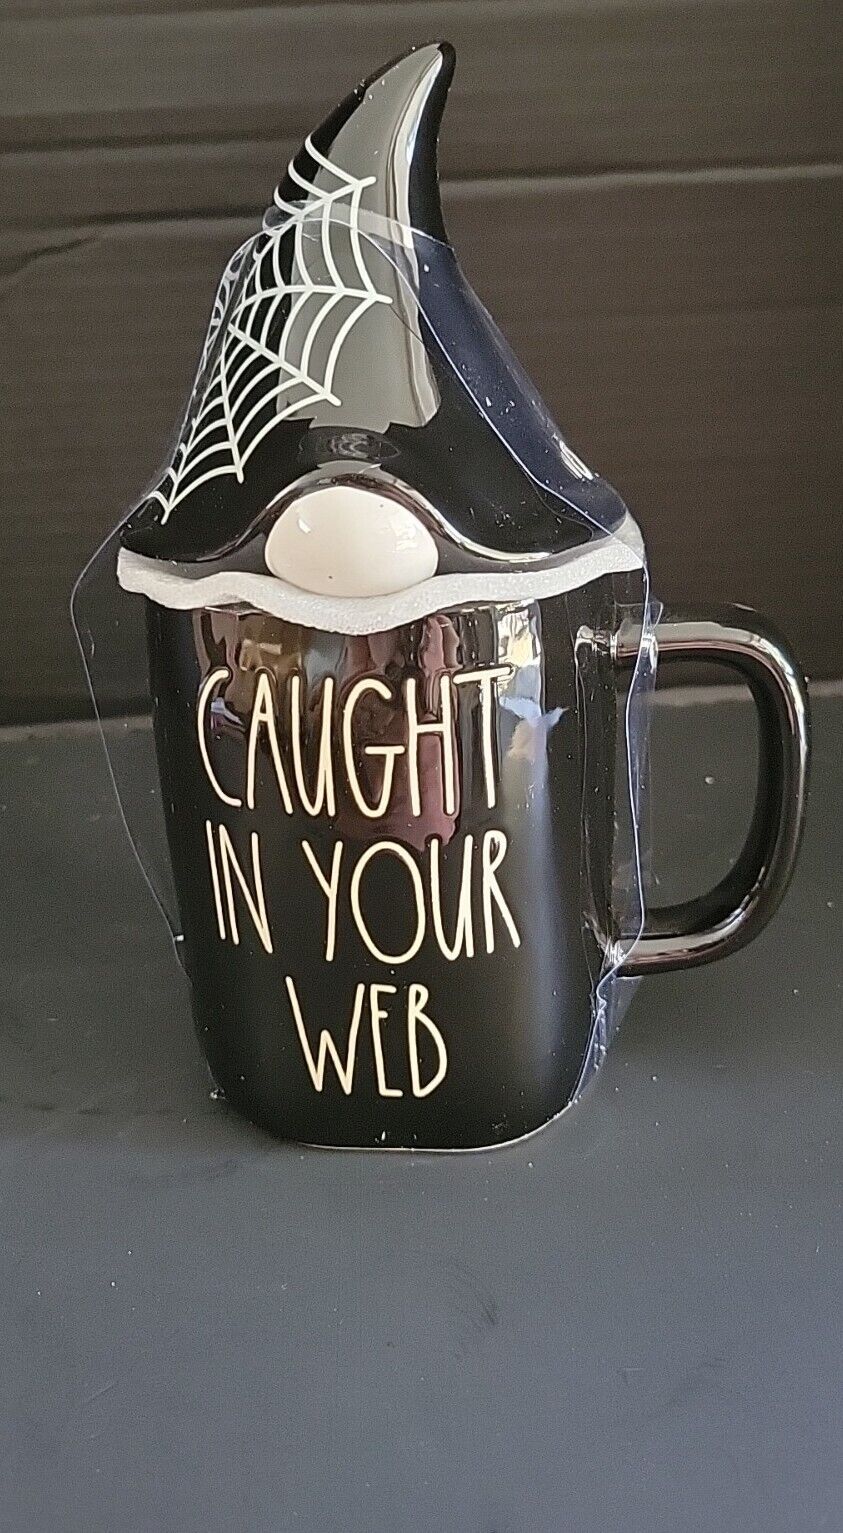 Rae Dunn CAUGHT IN YOUR WEB Mug with Gnome Topper Halloween.